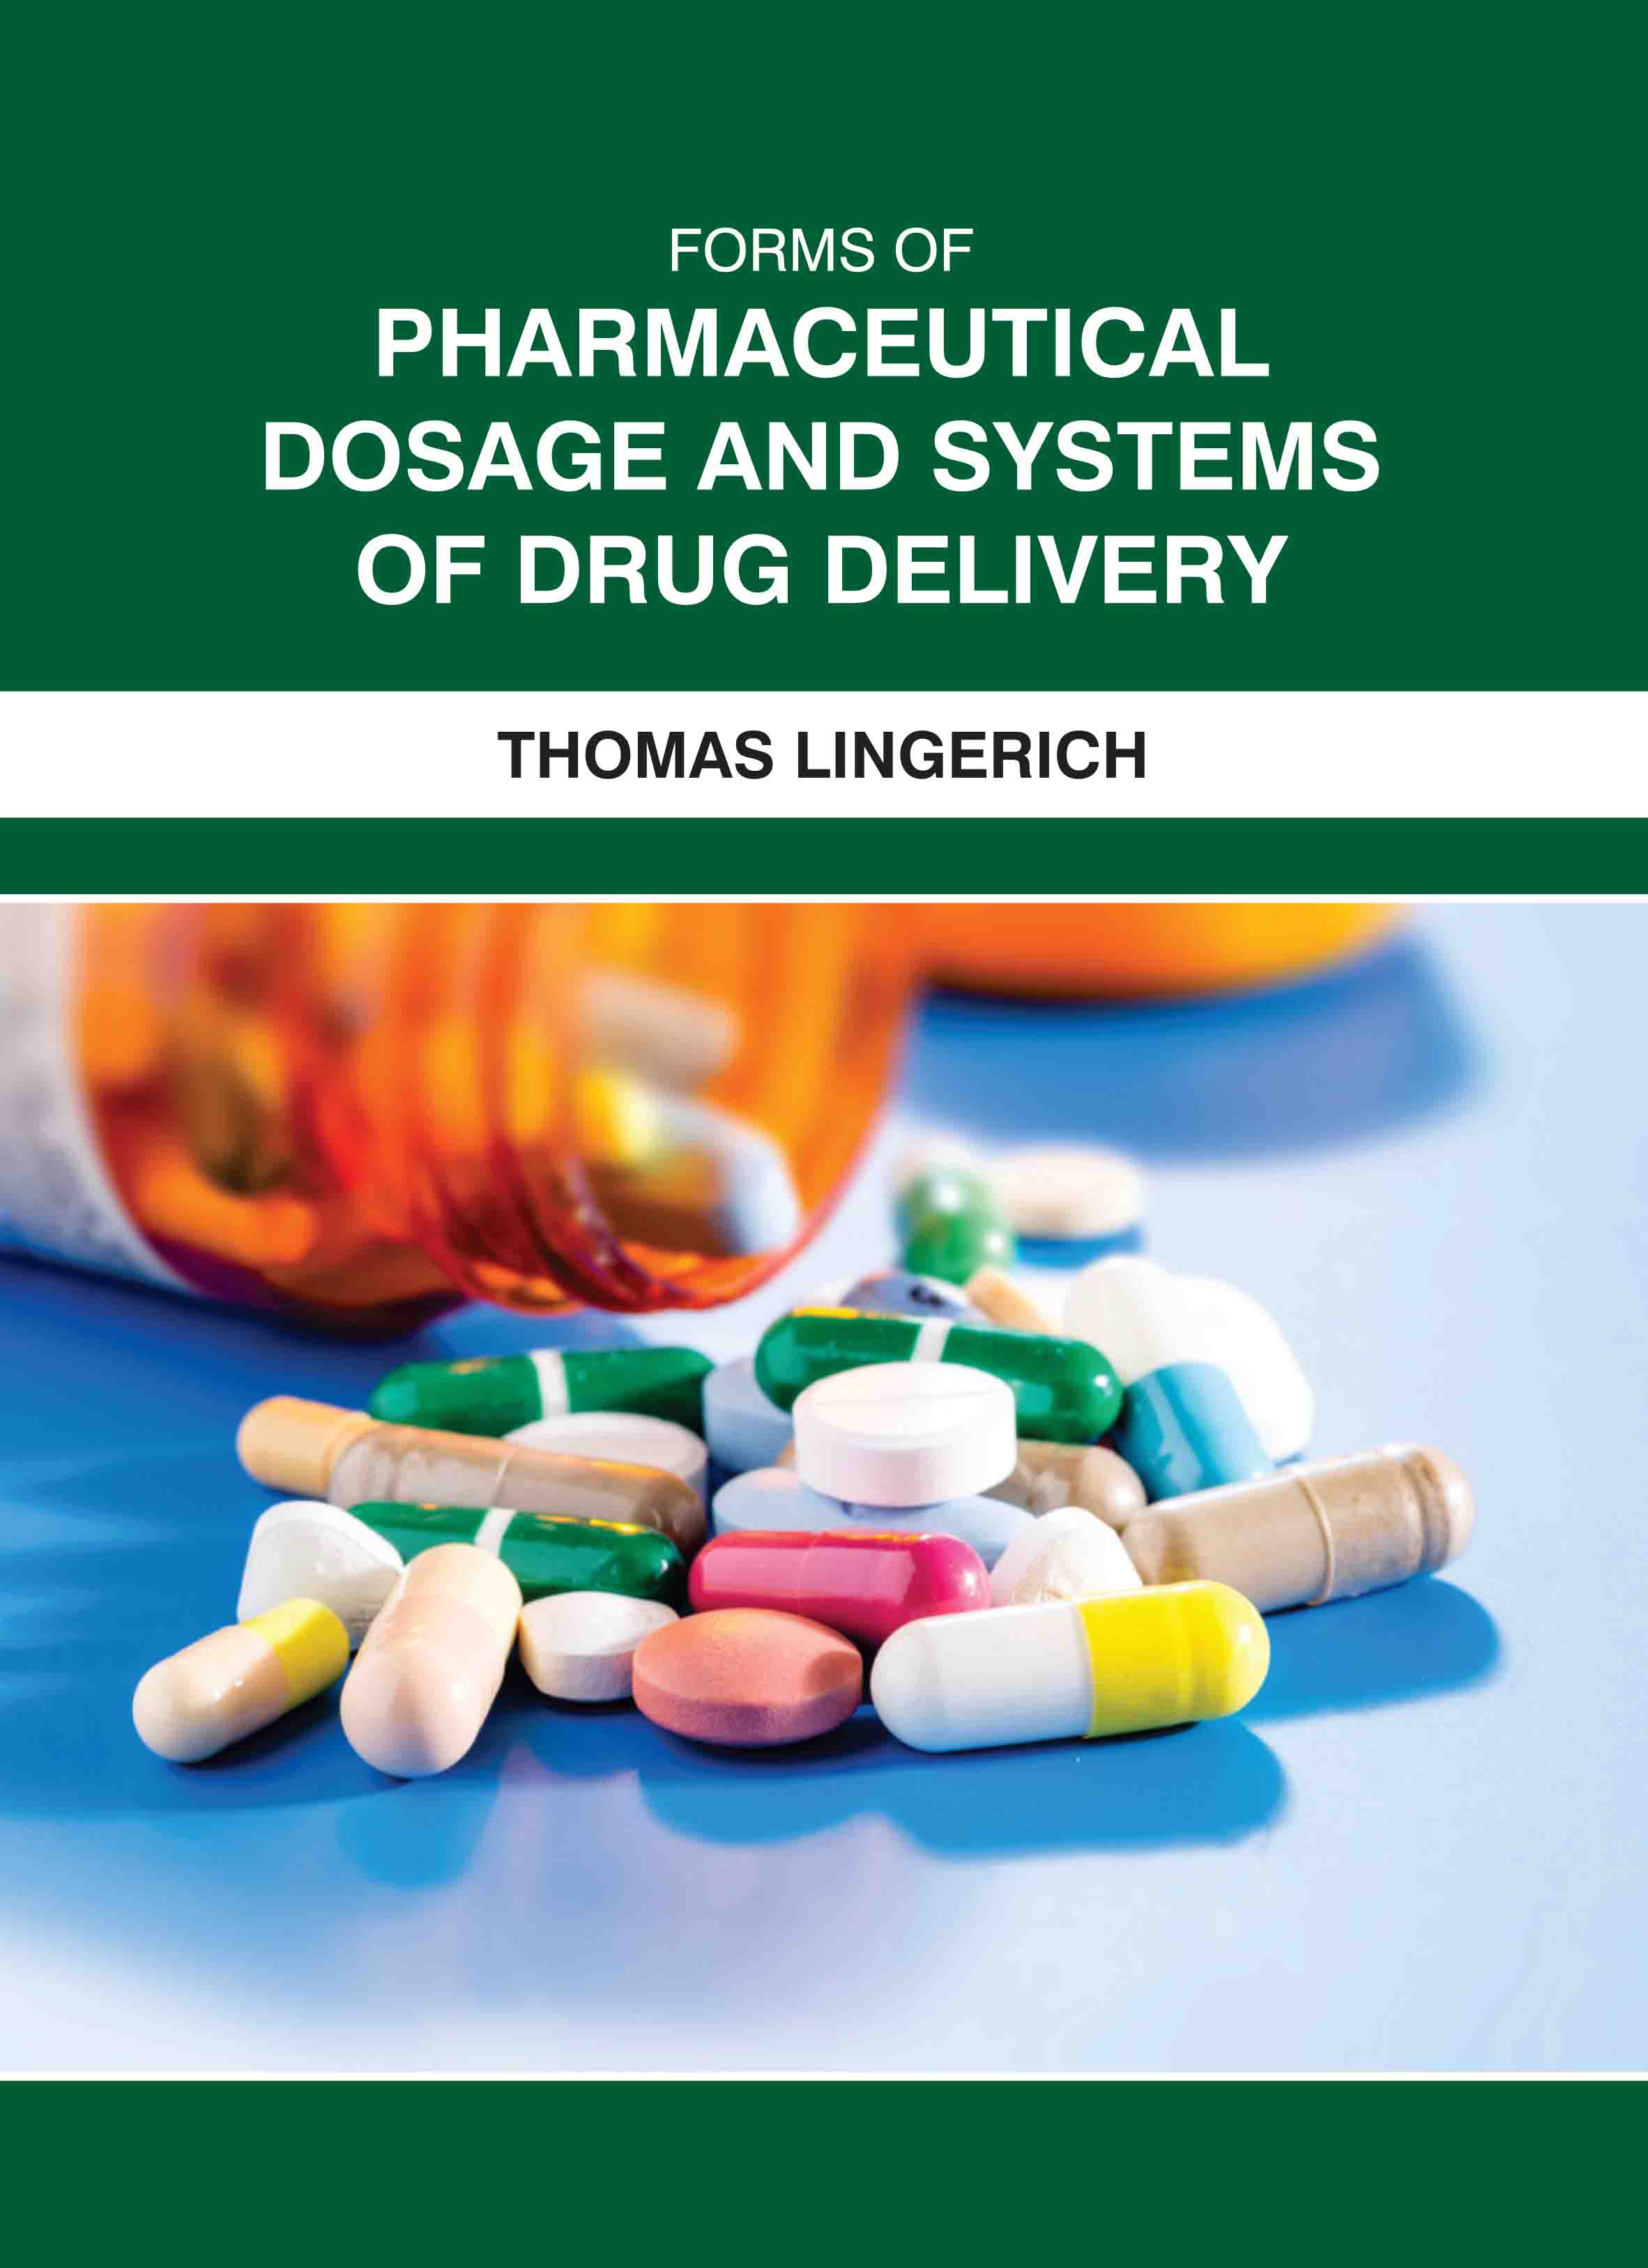 Forms of Pharmaceutical Dosage and Systems of Drug Delivery